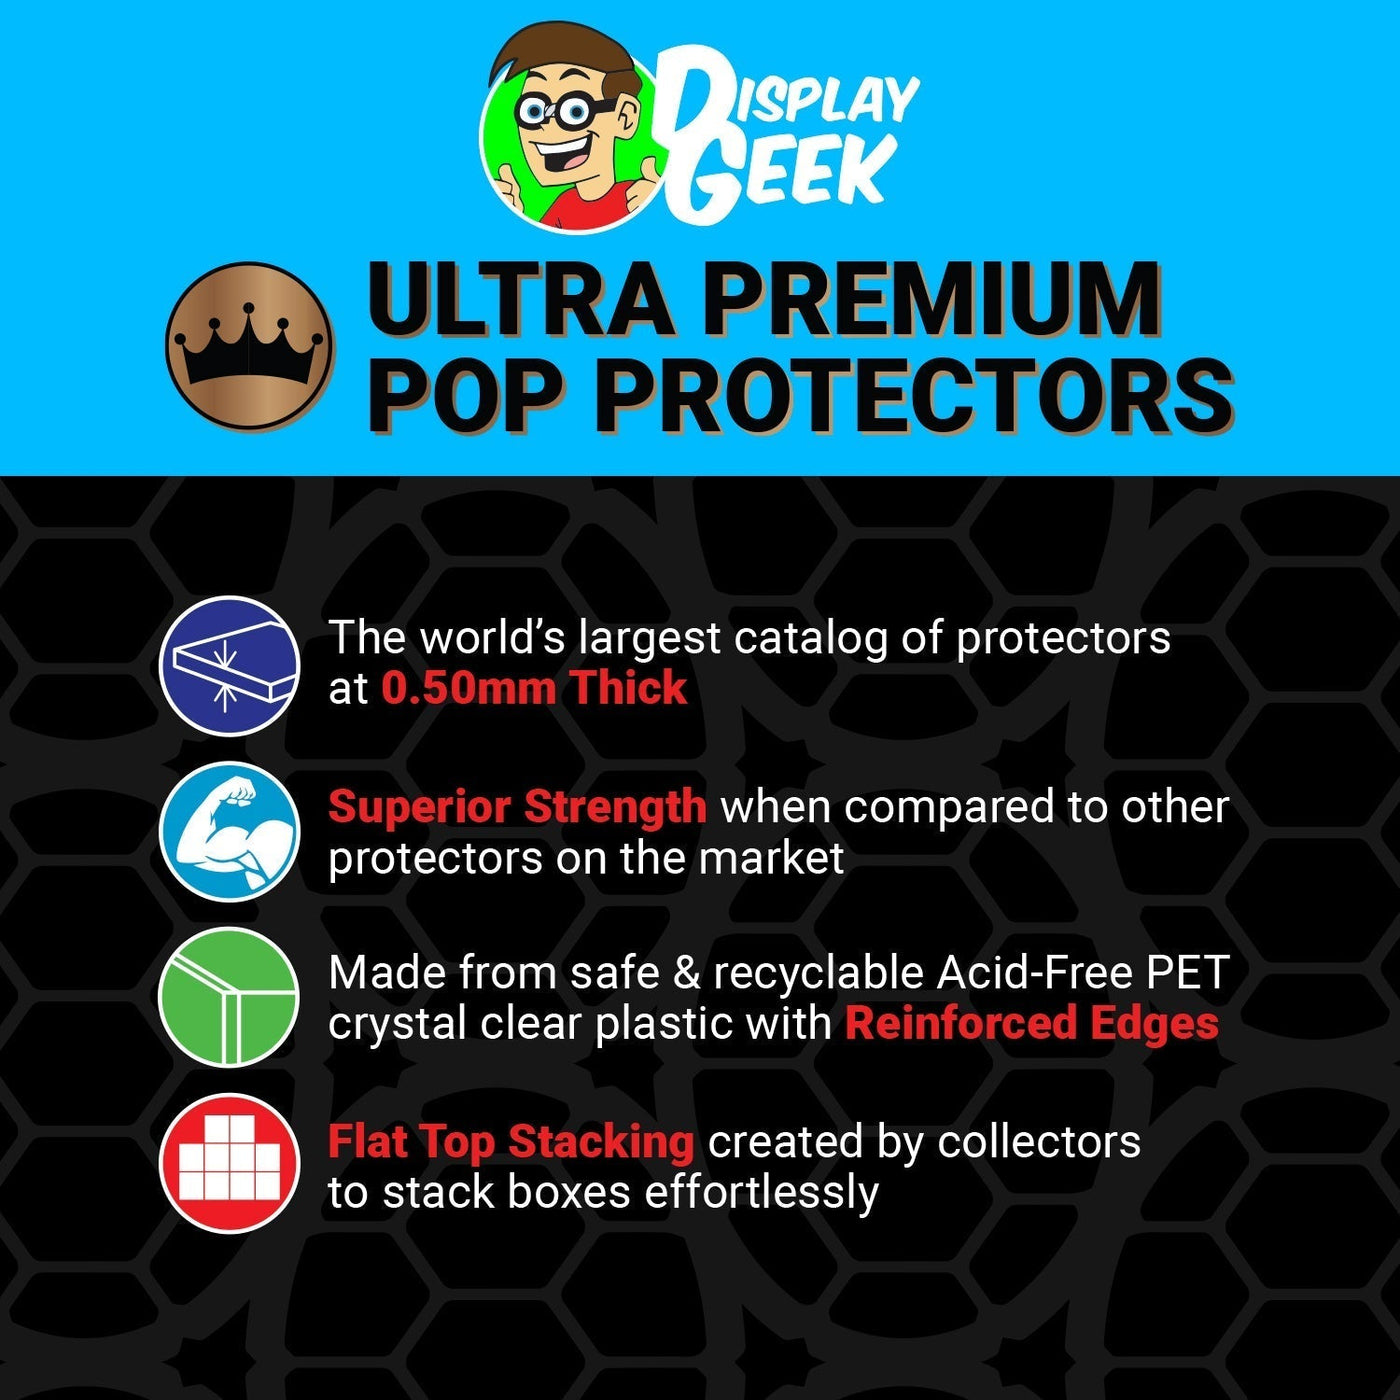 Pop Protector for 2 Pack Mini Maleficent & Evil Queen #04 Funko Pop on The Protector Guide App by Display Geek